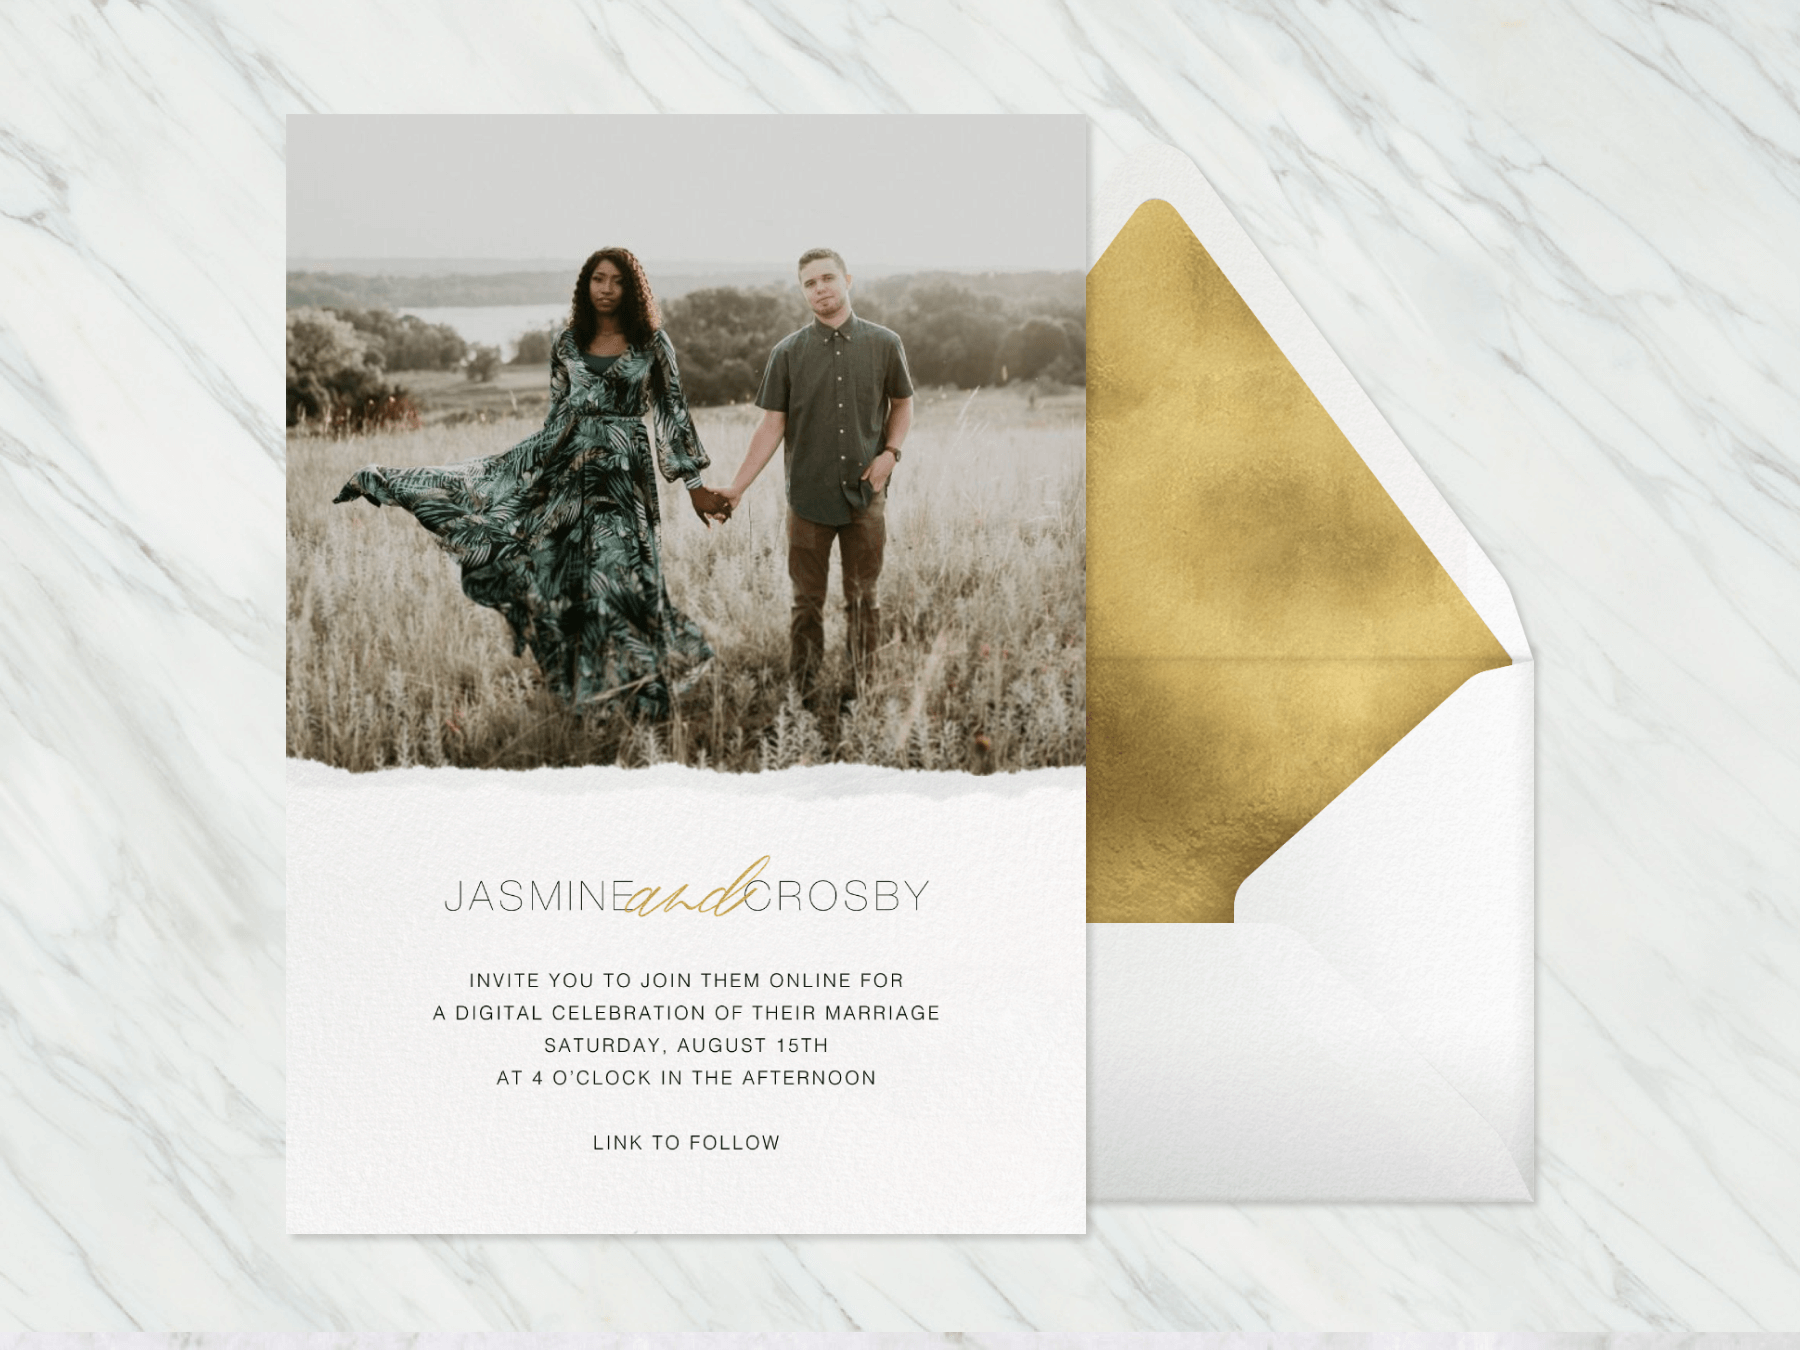 A wedding invitation with a photo of a couple in grasslands on the top and a raw edge look below, beside a white envelope with gold liner.